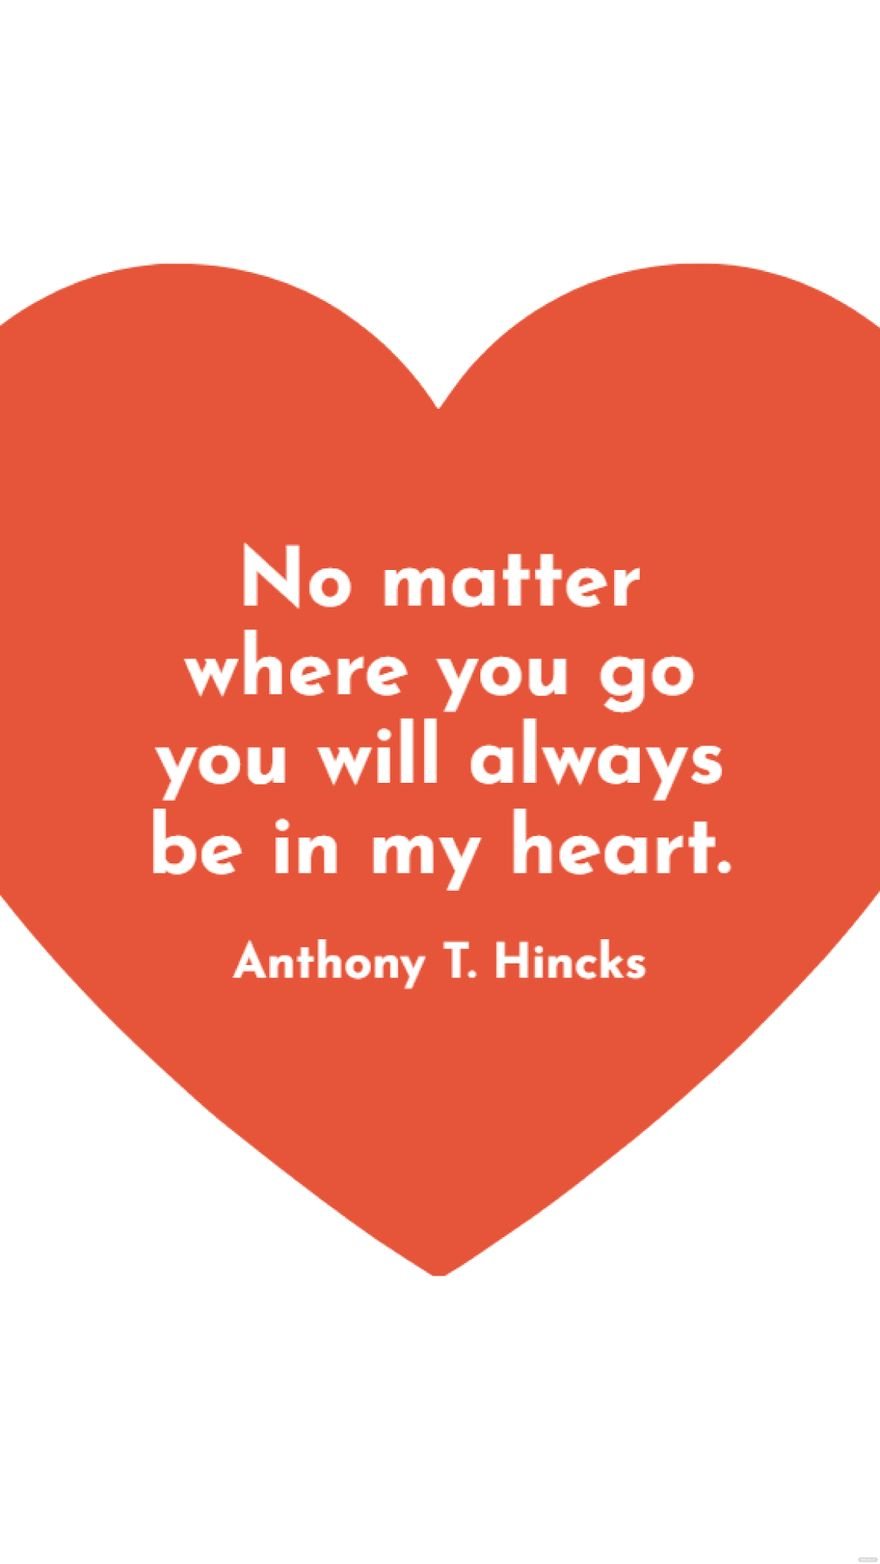 Anthony T. Hincks - No matter where you go you will always be in my heart. in JPG